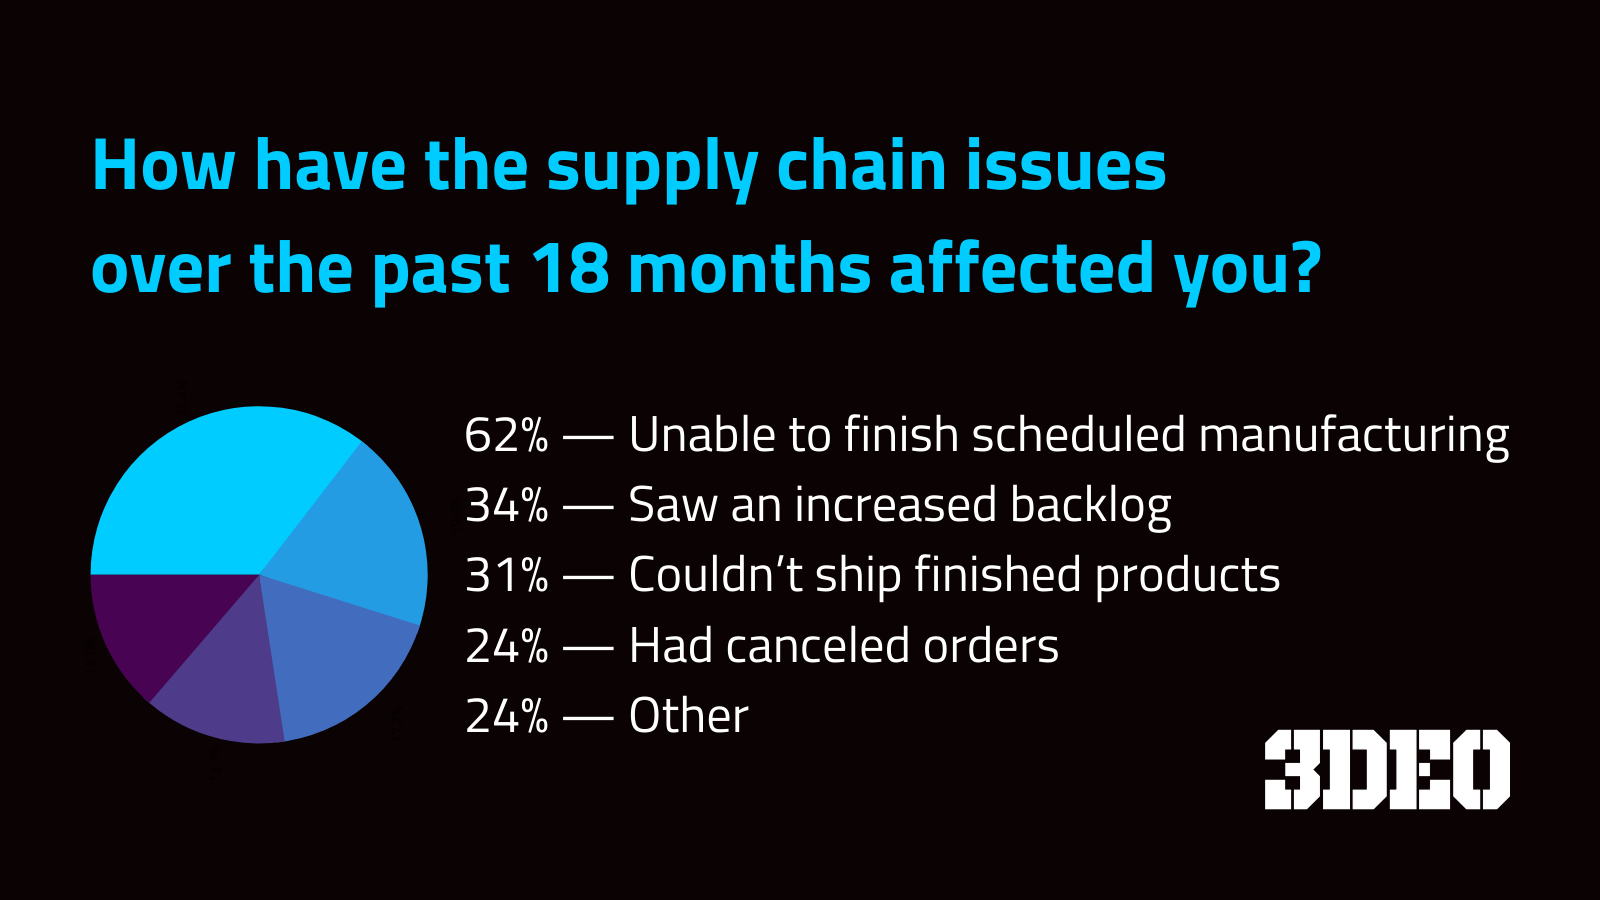 Infographic displaying how the supply chain issues over the past 18 months have impacted businesses: 62% faced unfinished manufacturing, 31% saw an increased backlog, 24% had canceled orders, 24% other.